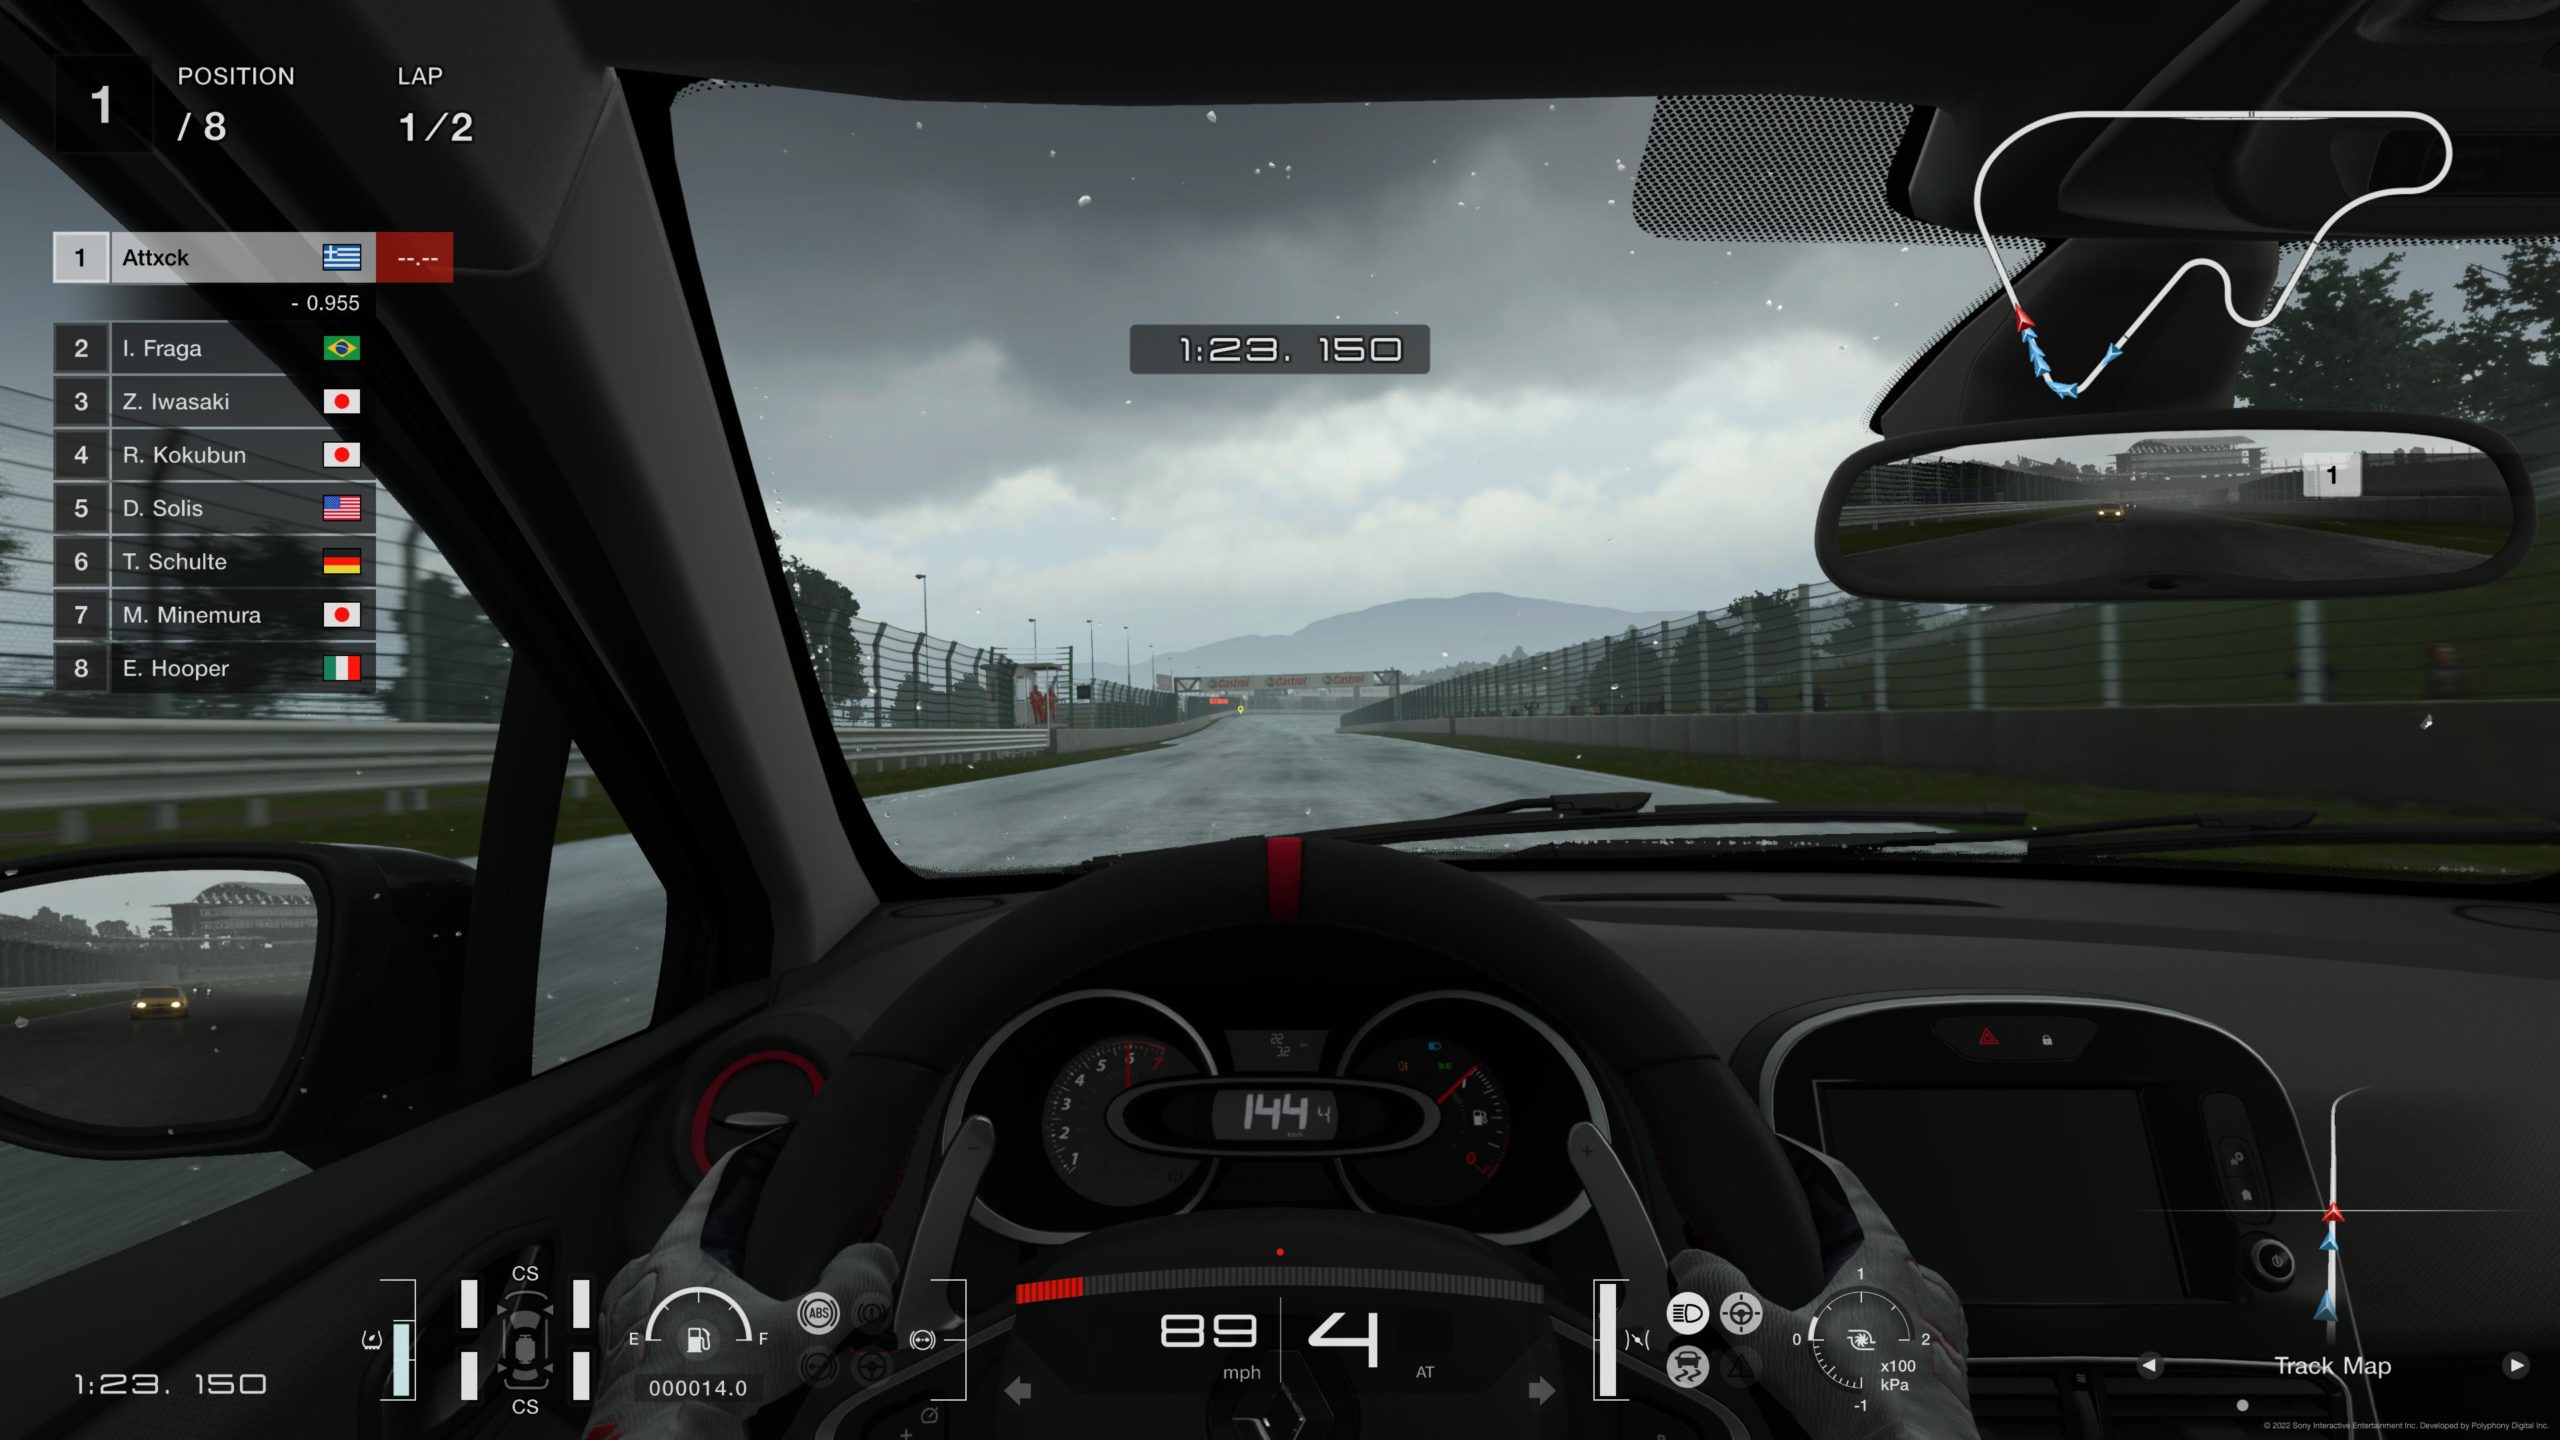 Gran Turismo 7 review: For car enthusiasts - GadgetMatch